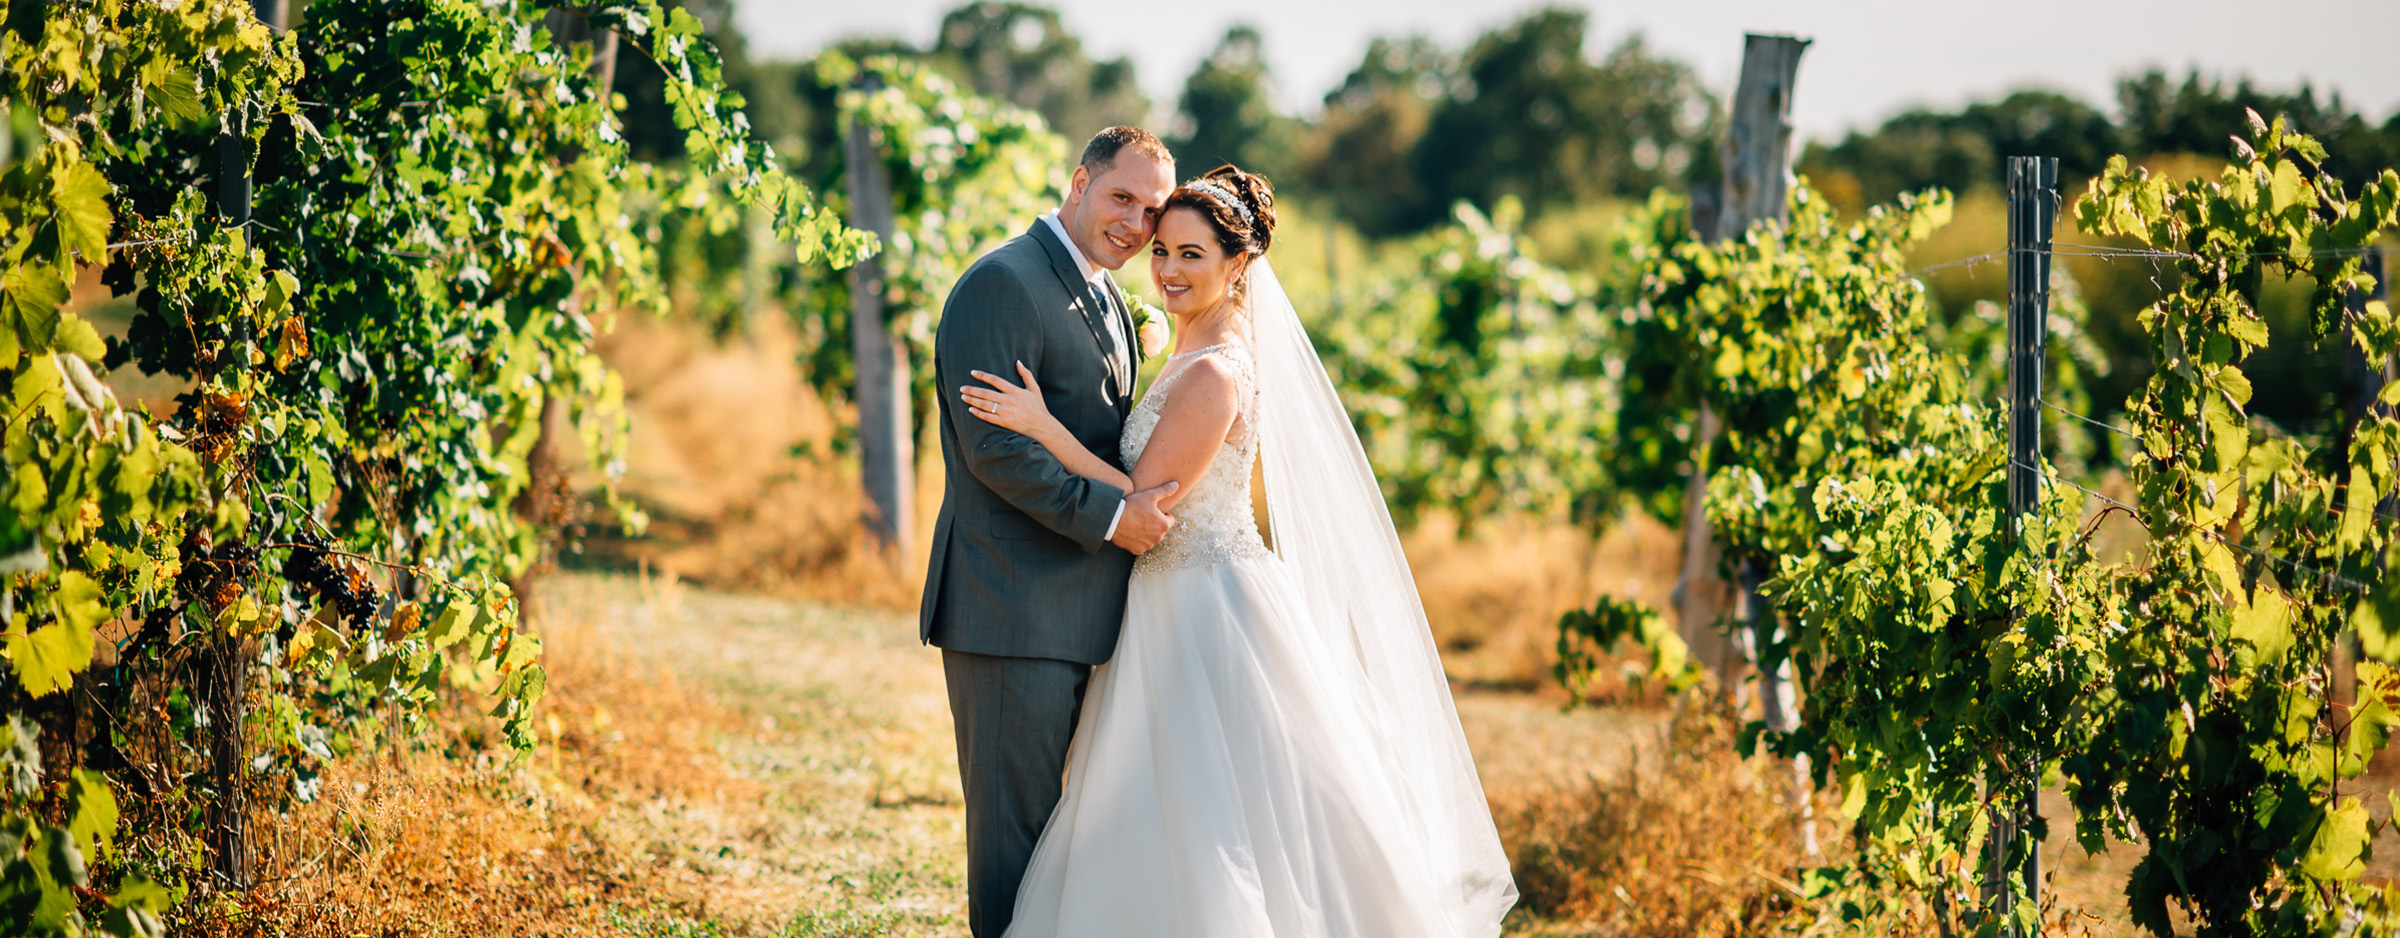 Bride and Groom at Gouveia Vineyards in Wallingford